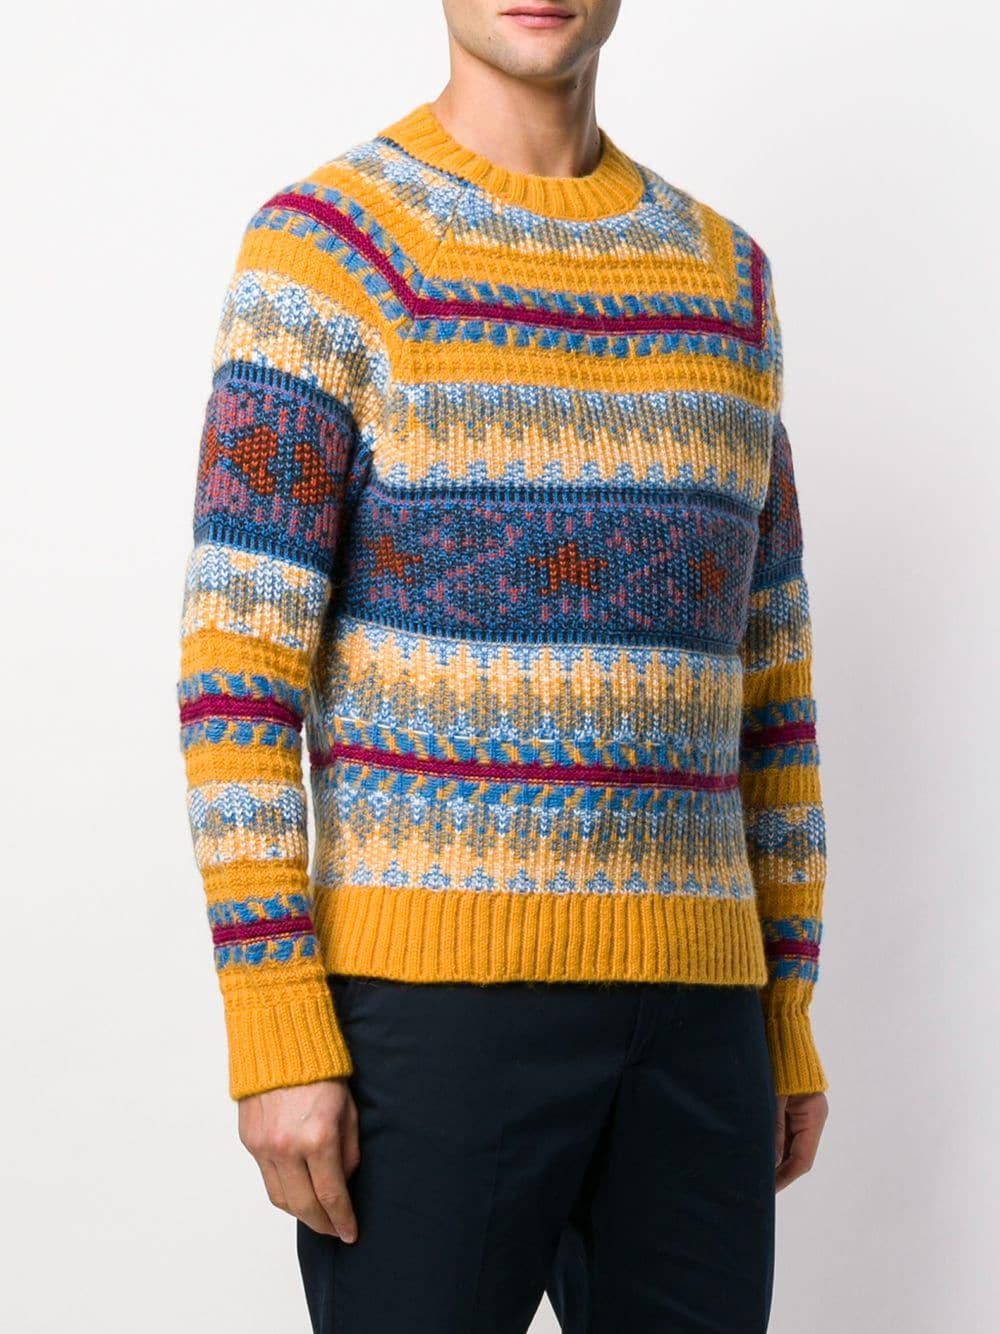 Acne Studios Wool Striped Jacquard Sweater in Yellow for Men - Lyst